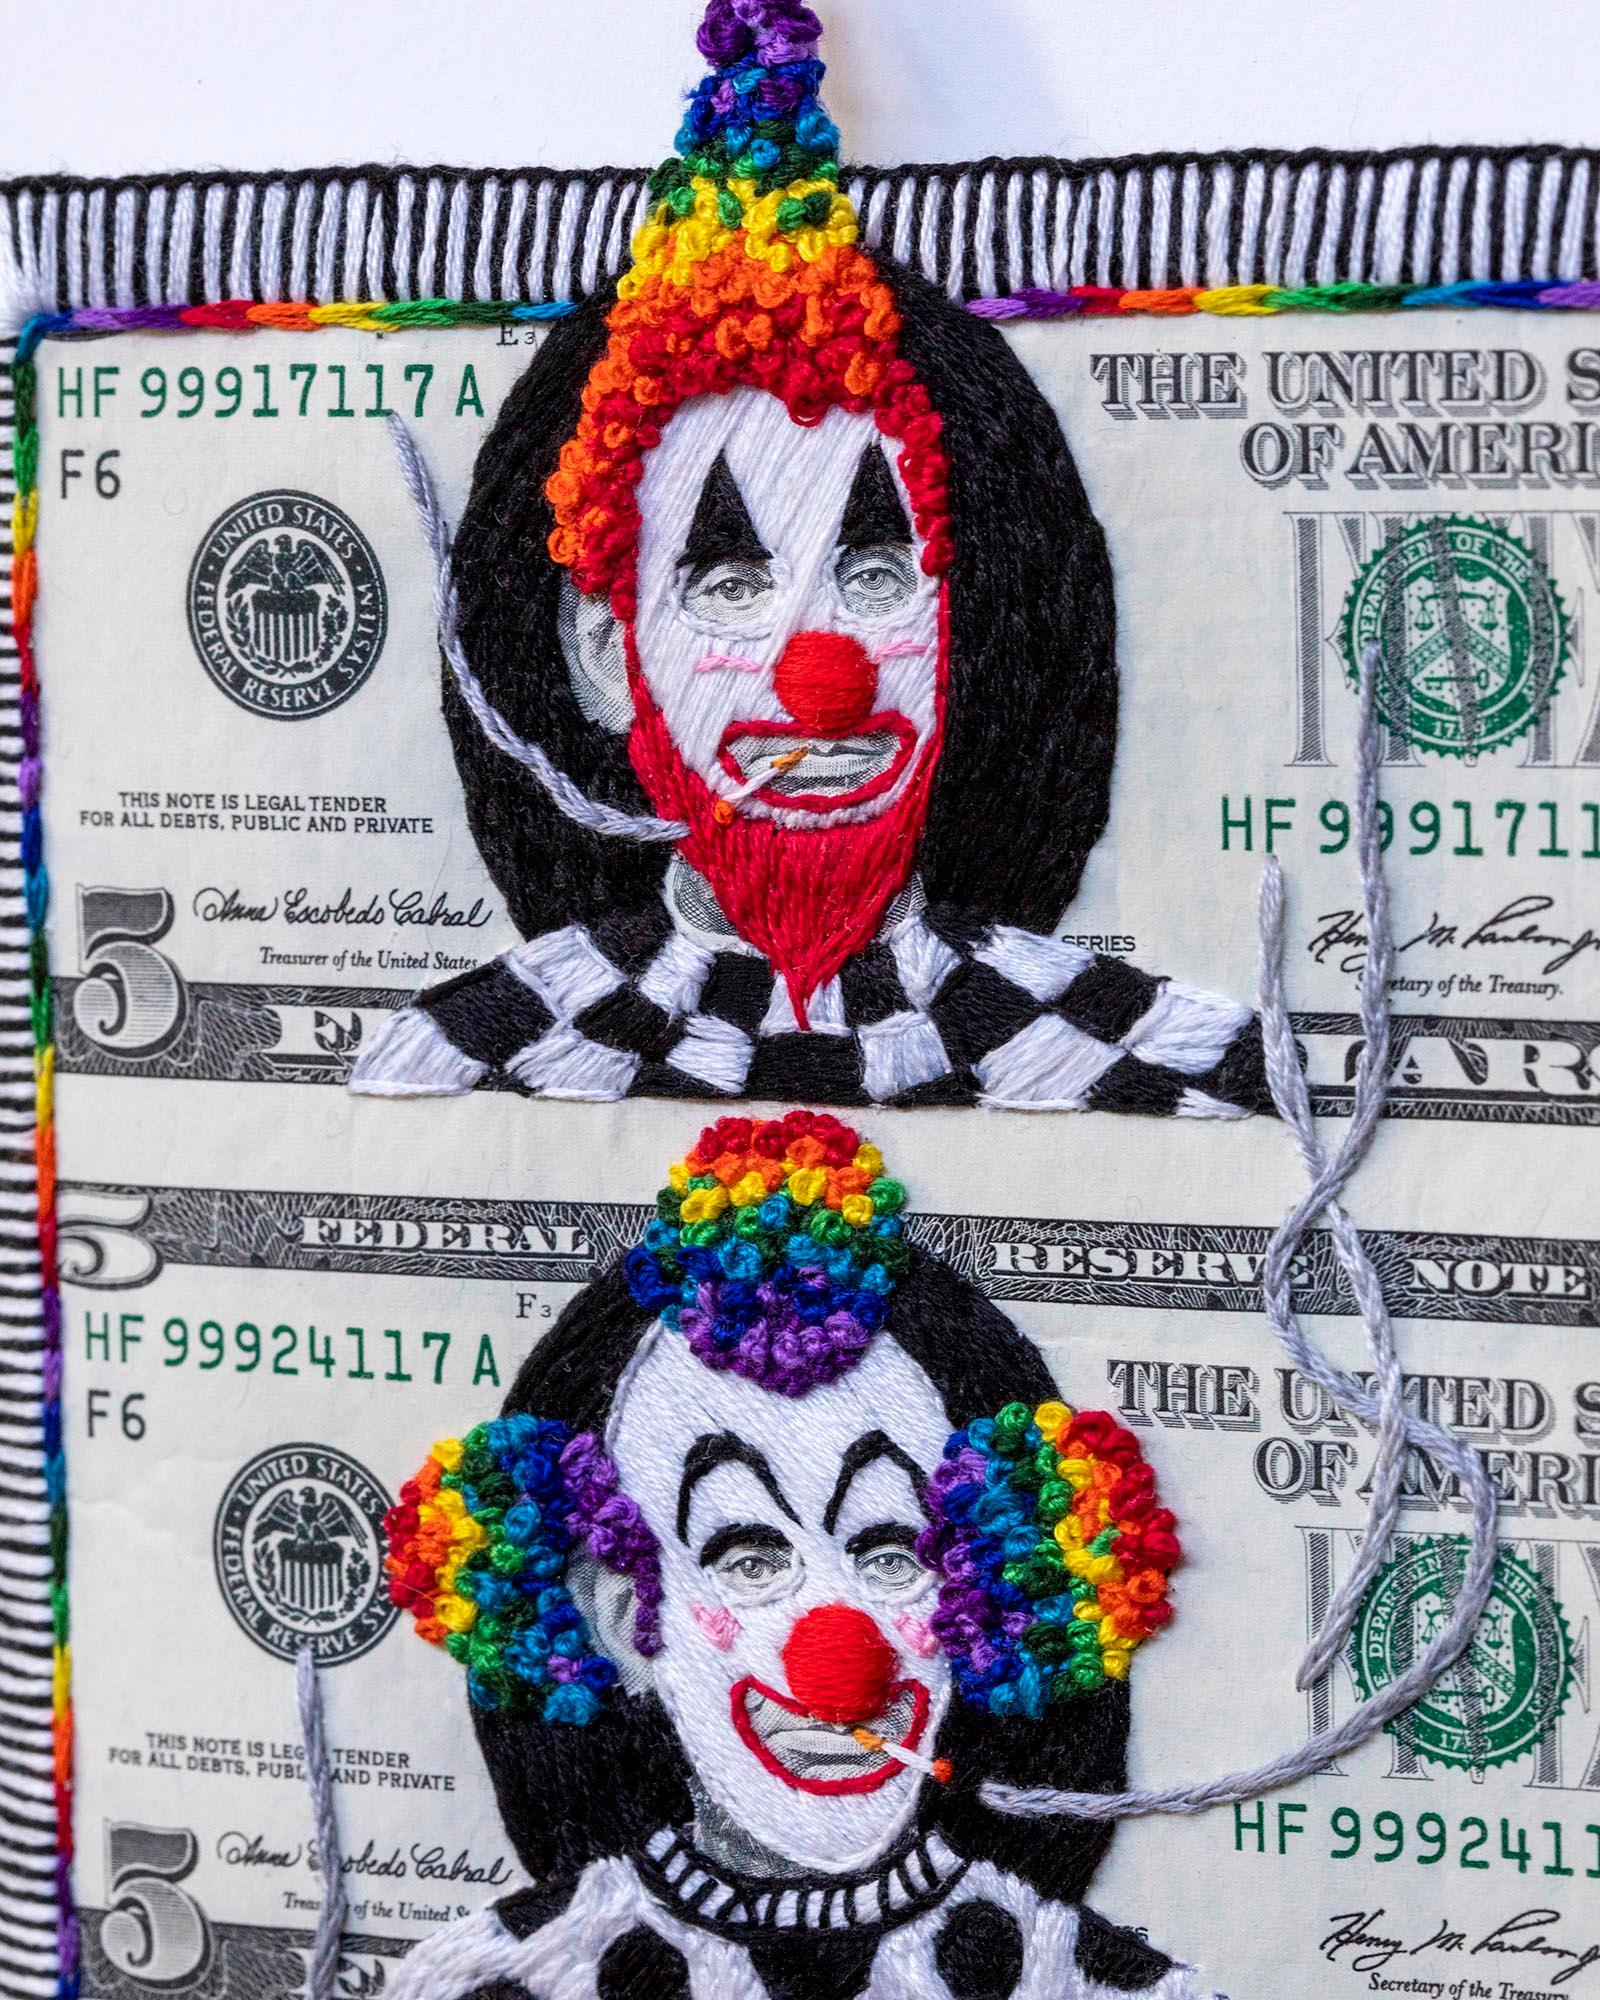 Stacey Lee Webber

Uncuts: Rainbow Clown Troupe

15.5” x 11.5” outside dimensions of frame

hand stitched uncut US paper currency, 1x4 sheet of five dollar bills, signed on front

2022